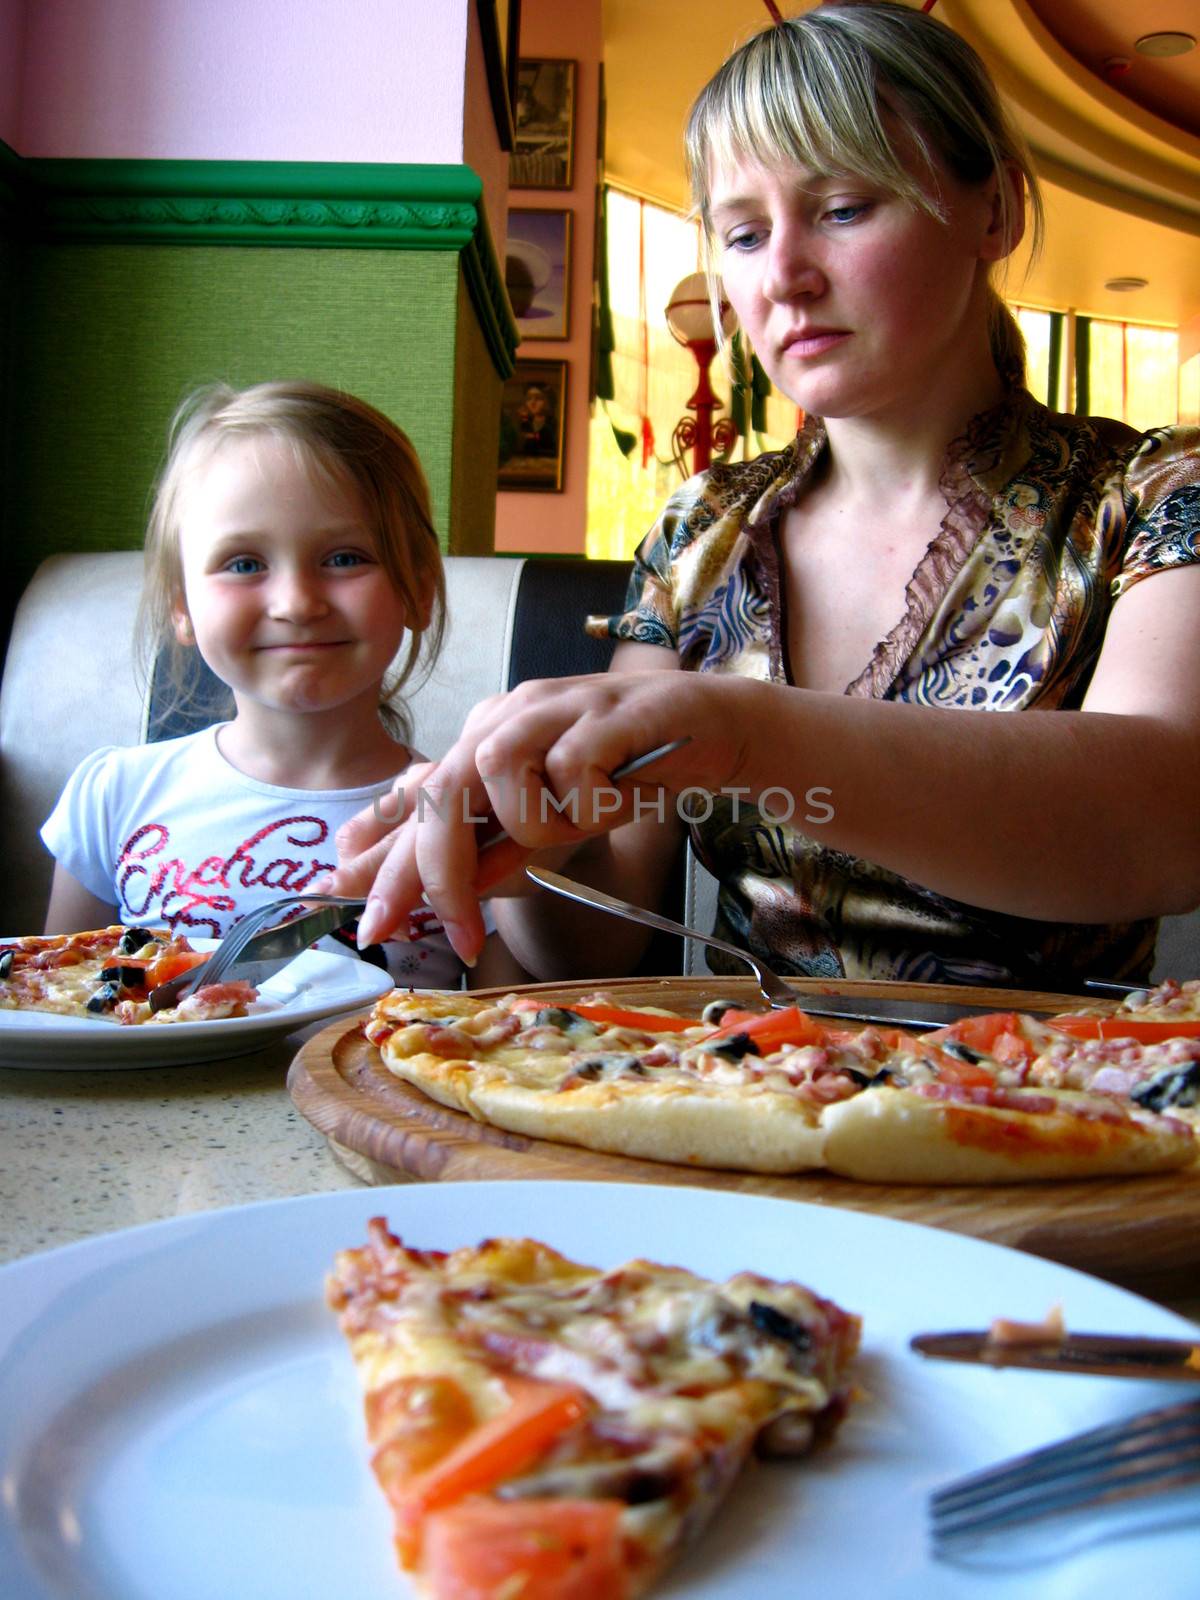 mother and daughter eating in pizzeria by alexmak